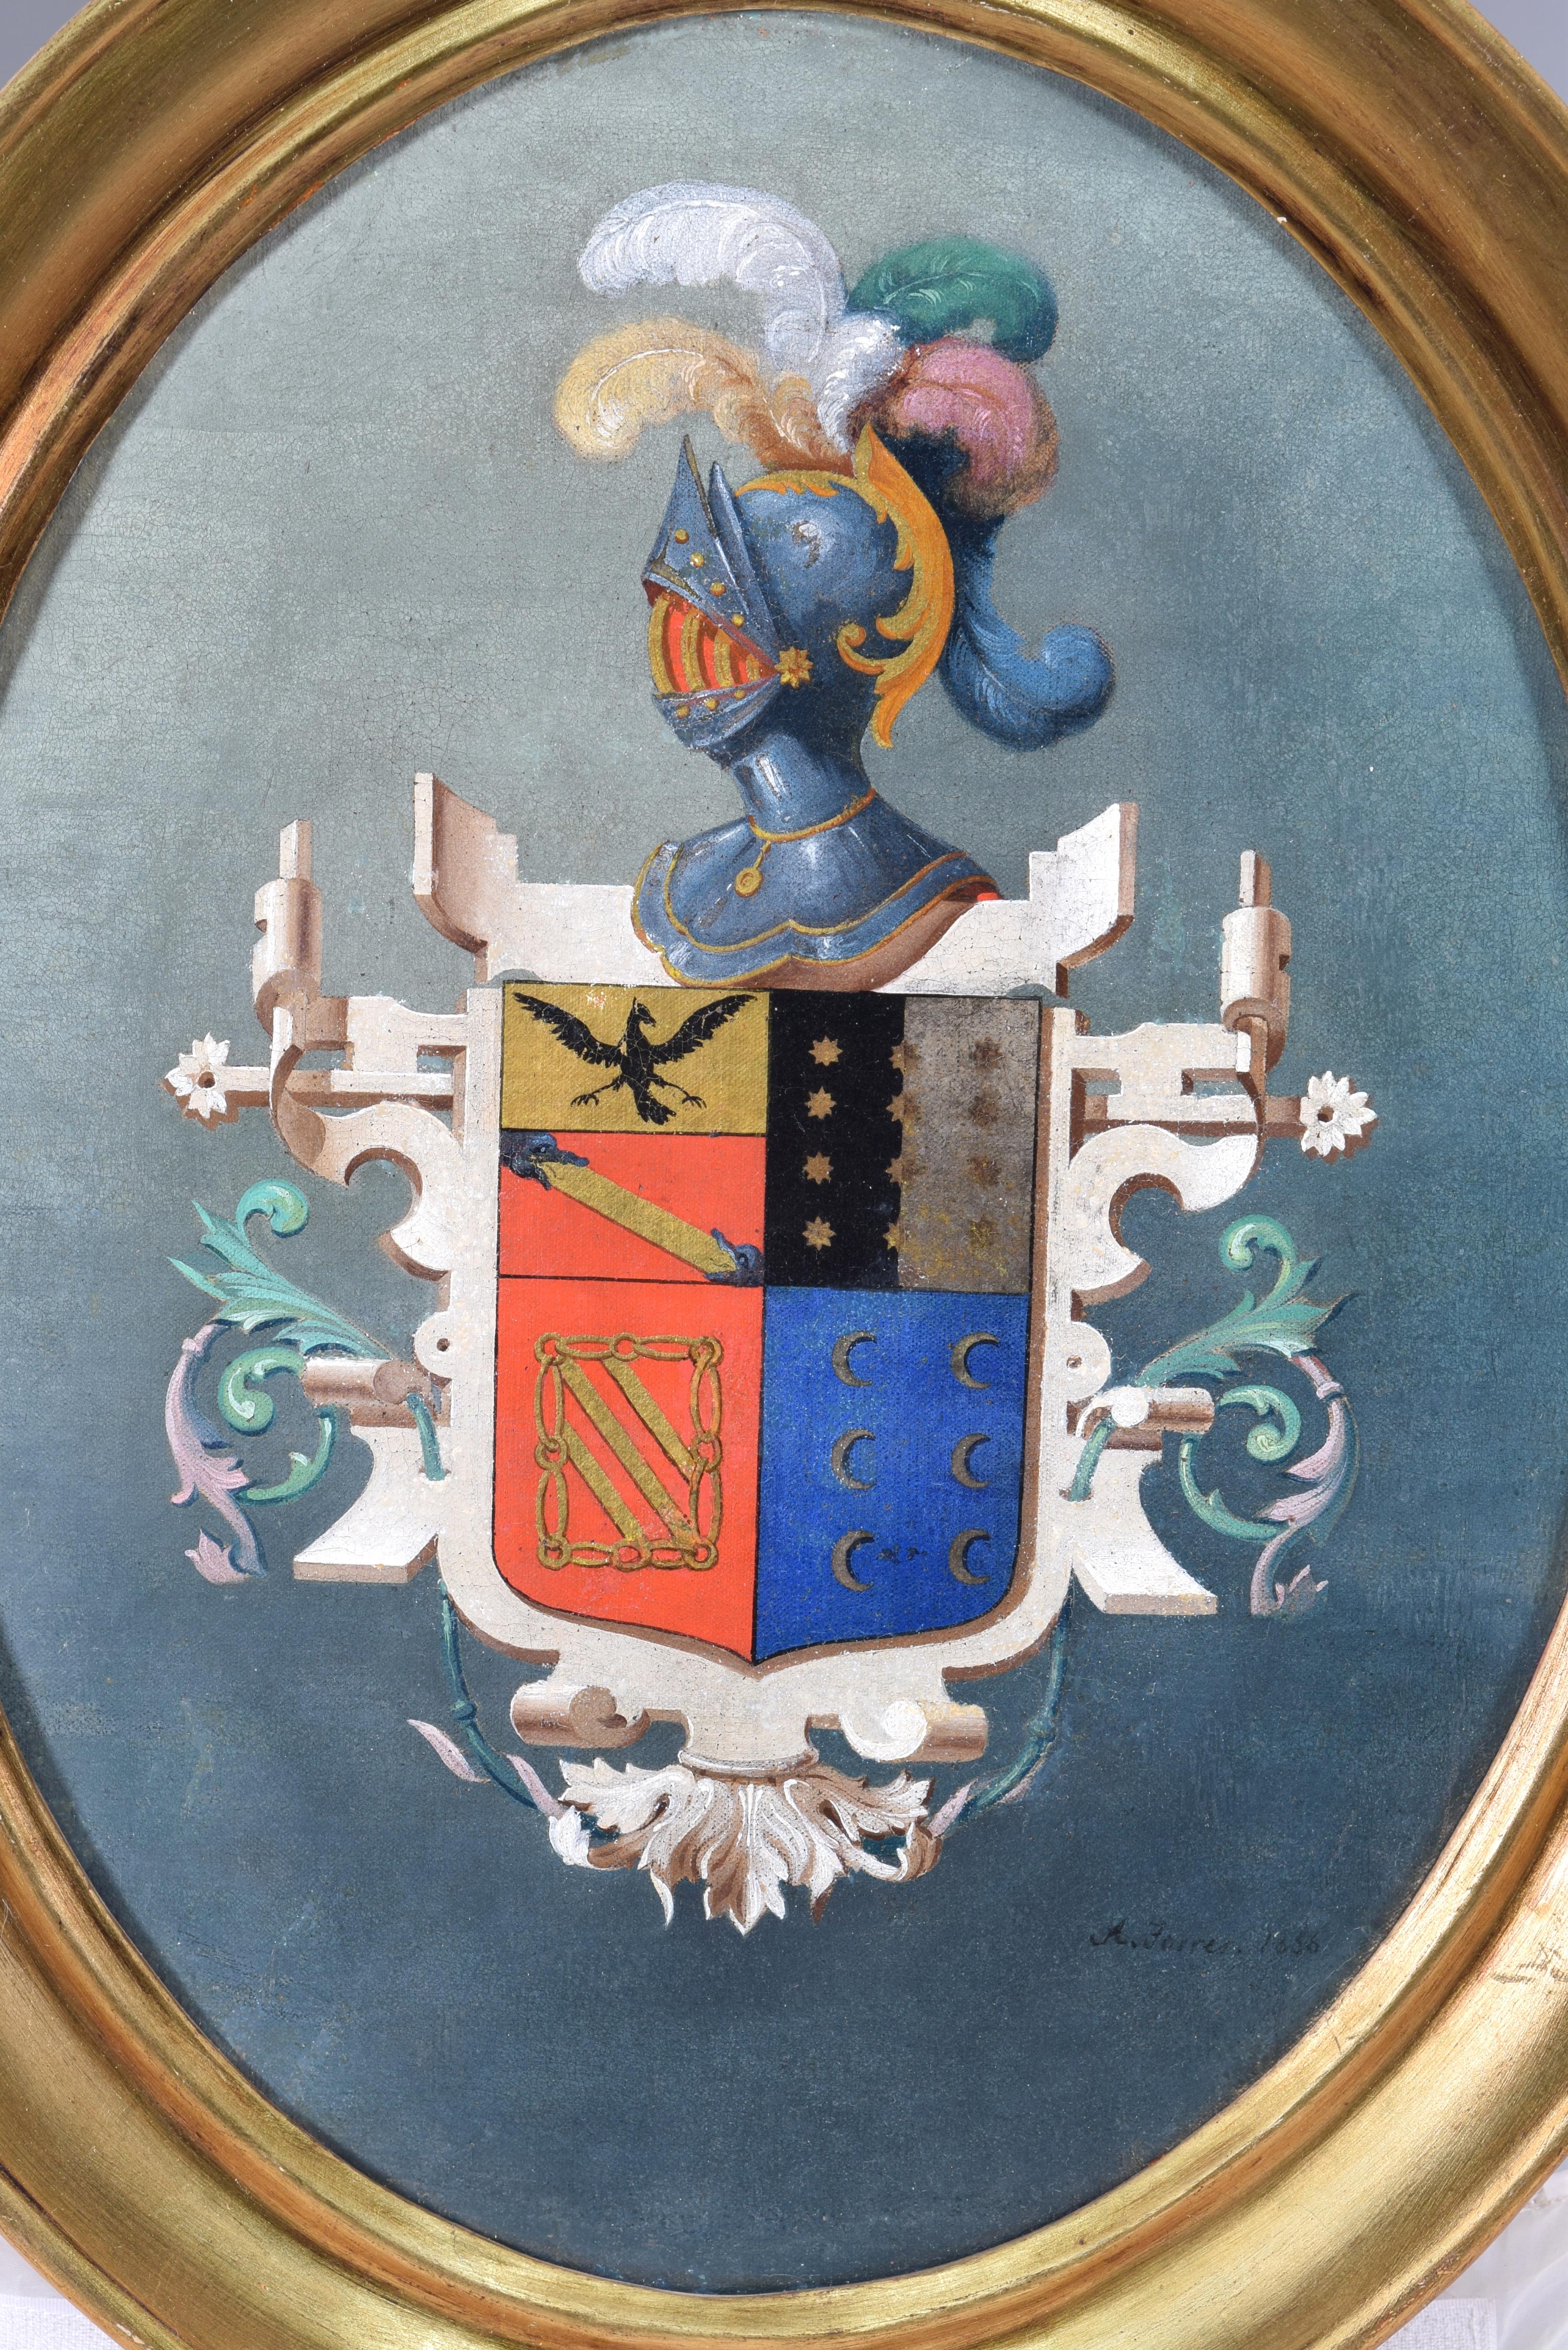 Heraldic shield. Oil on canvas. TORRES, A. Spanish school, 1856. 
Signed and dated. 
This work shows a heraldic shield on a blue background with different tones, in an oval and framed support. The central (and only) element of the composition